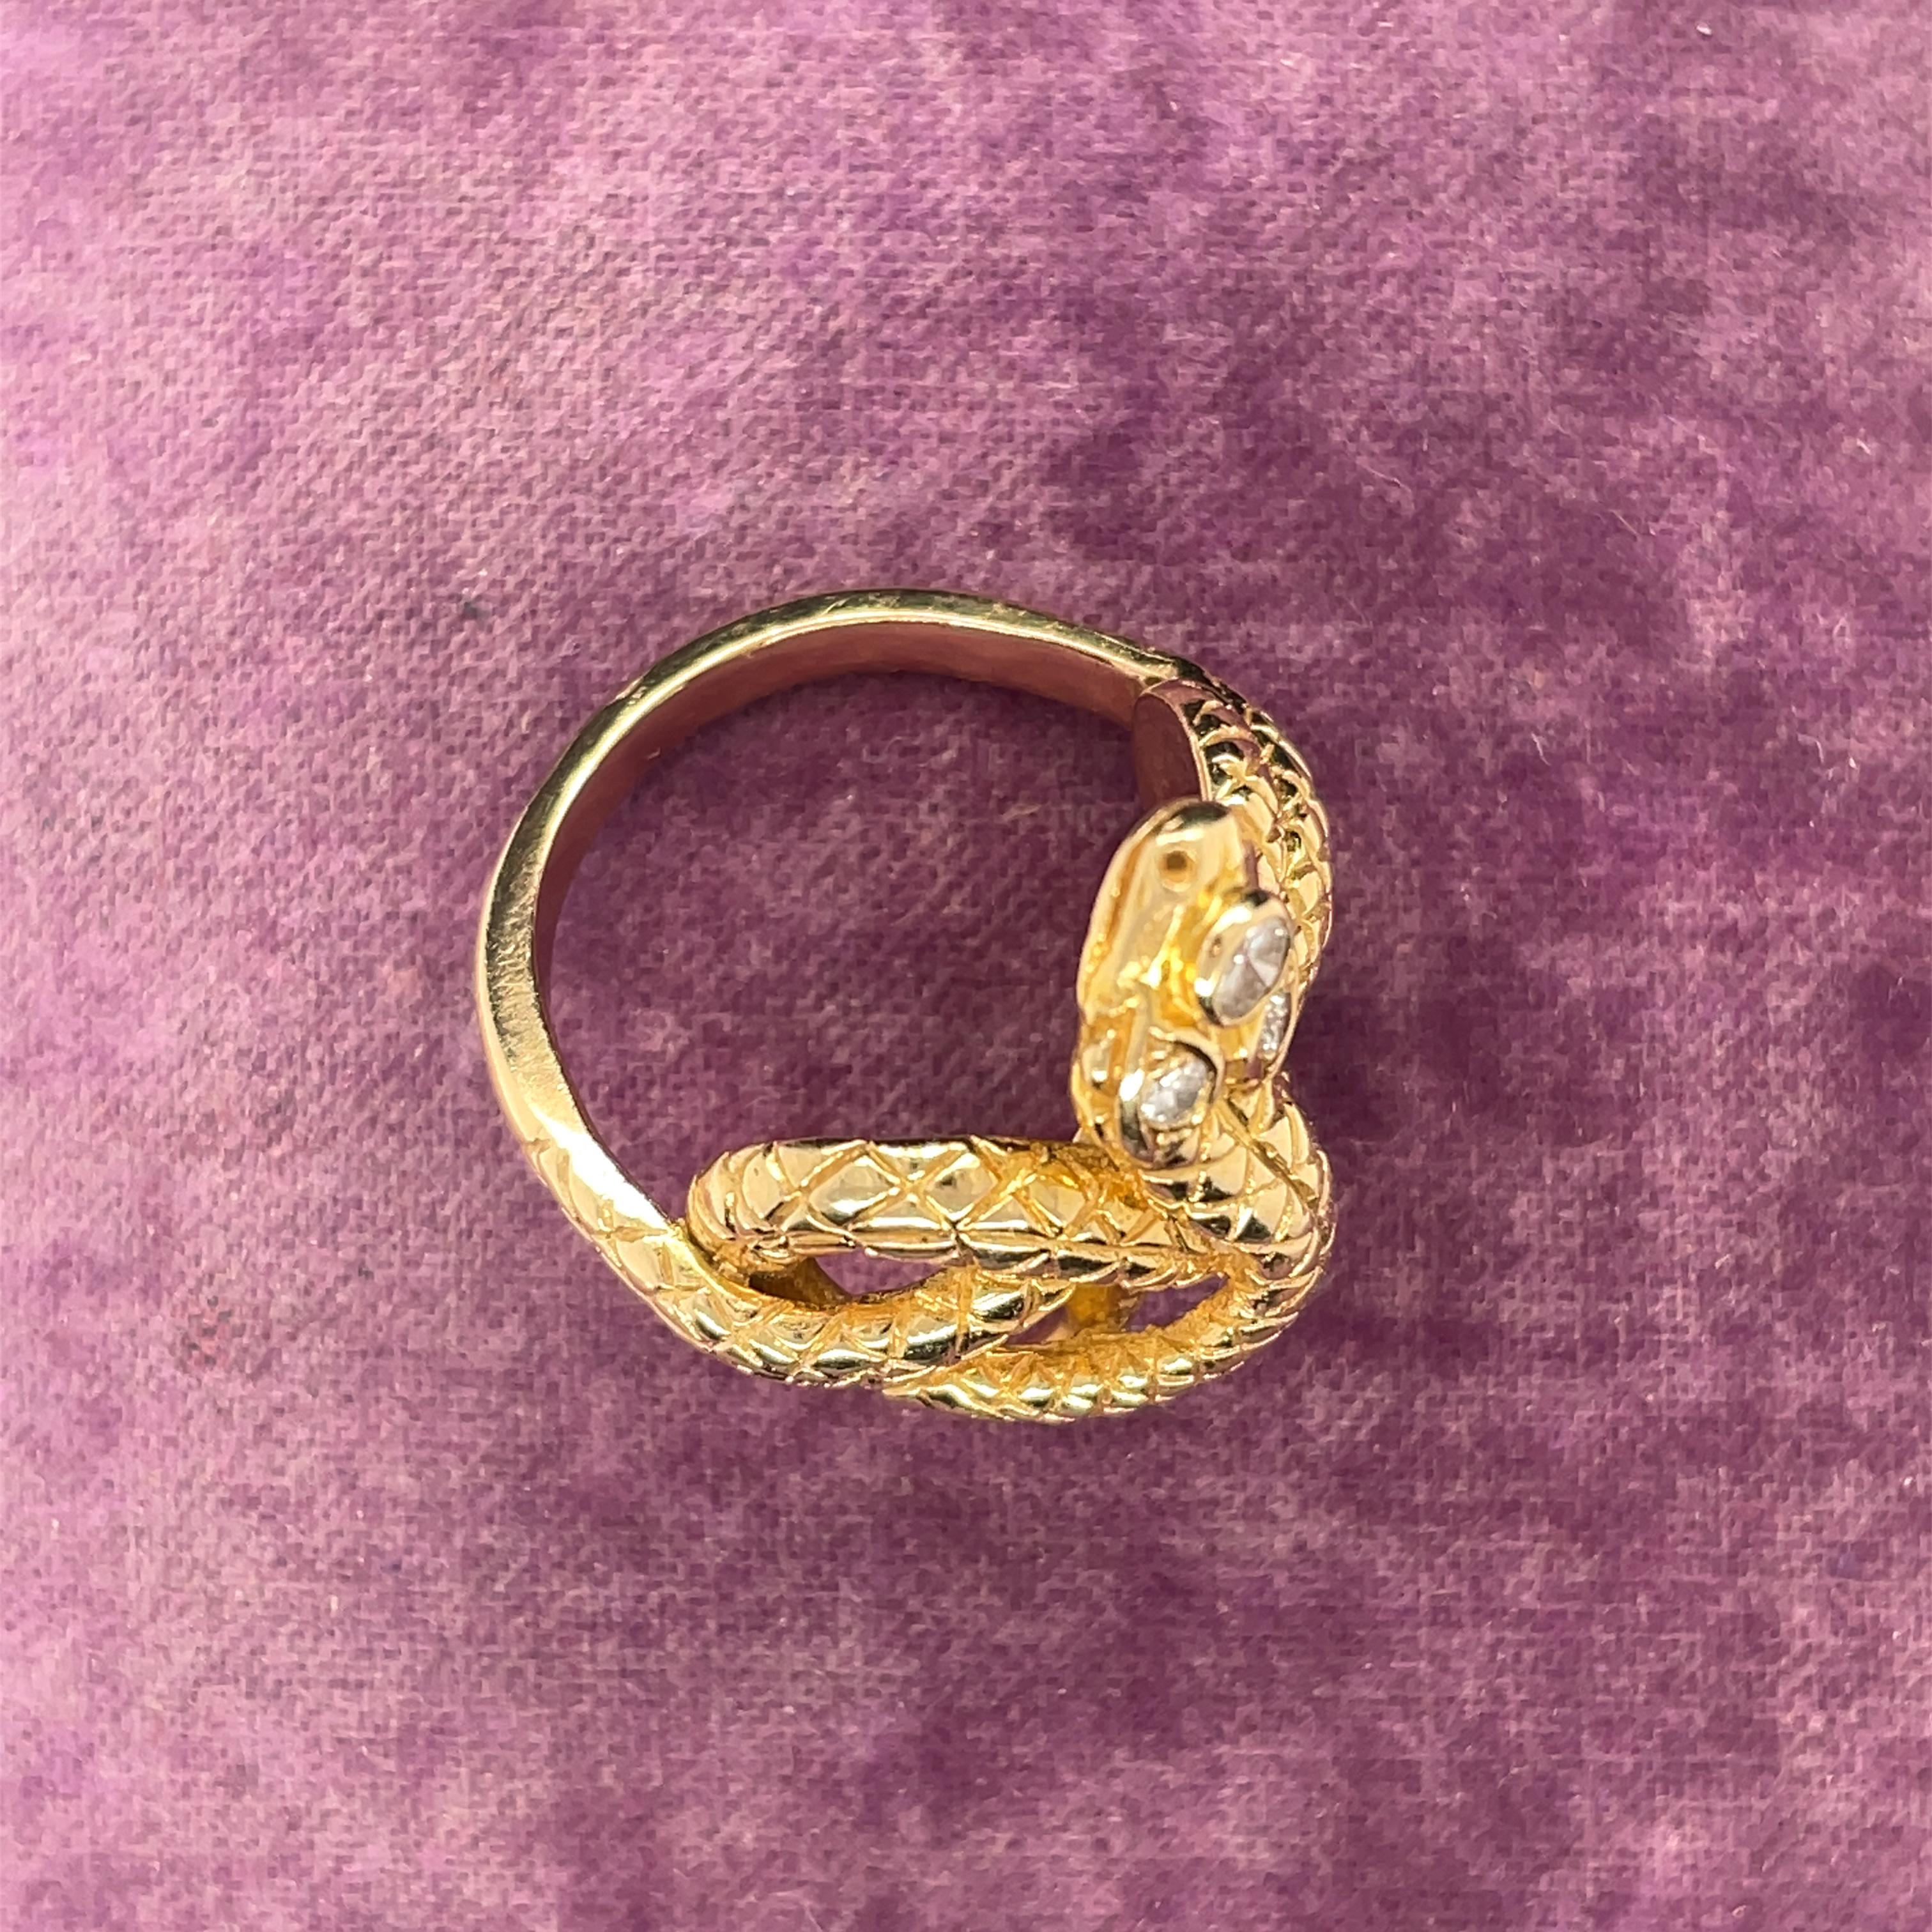 Vintage 14K Yellow Gold and Diamonds Snake Ring For Sale 1